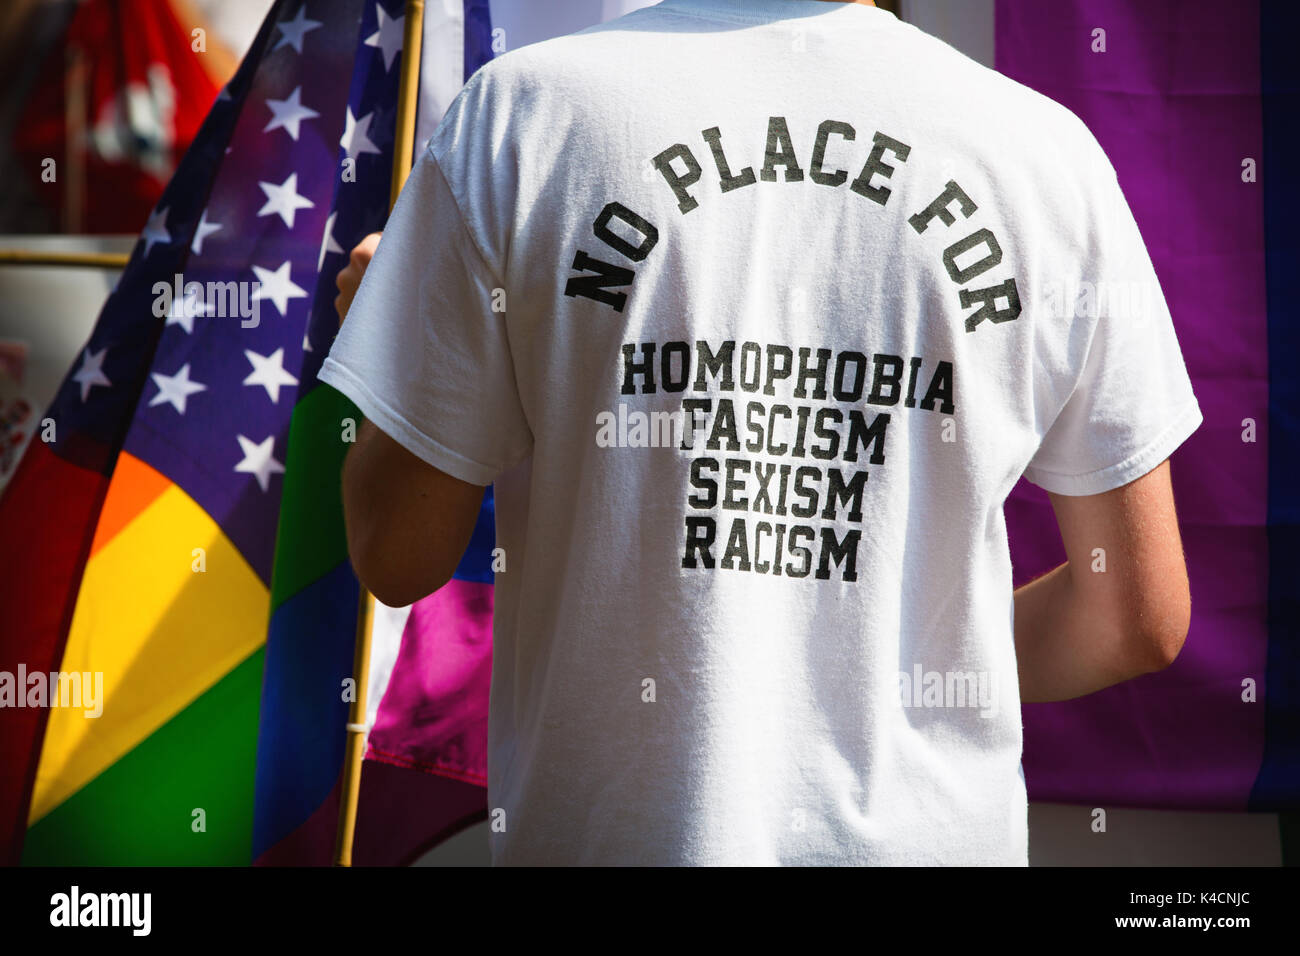 Christpher Street Day, Demonstration Against Homophobia, Racism, Fascism And Sexism Stock Photo